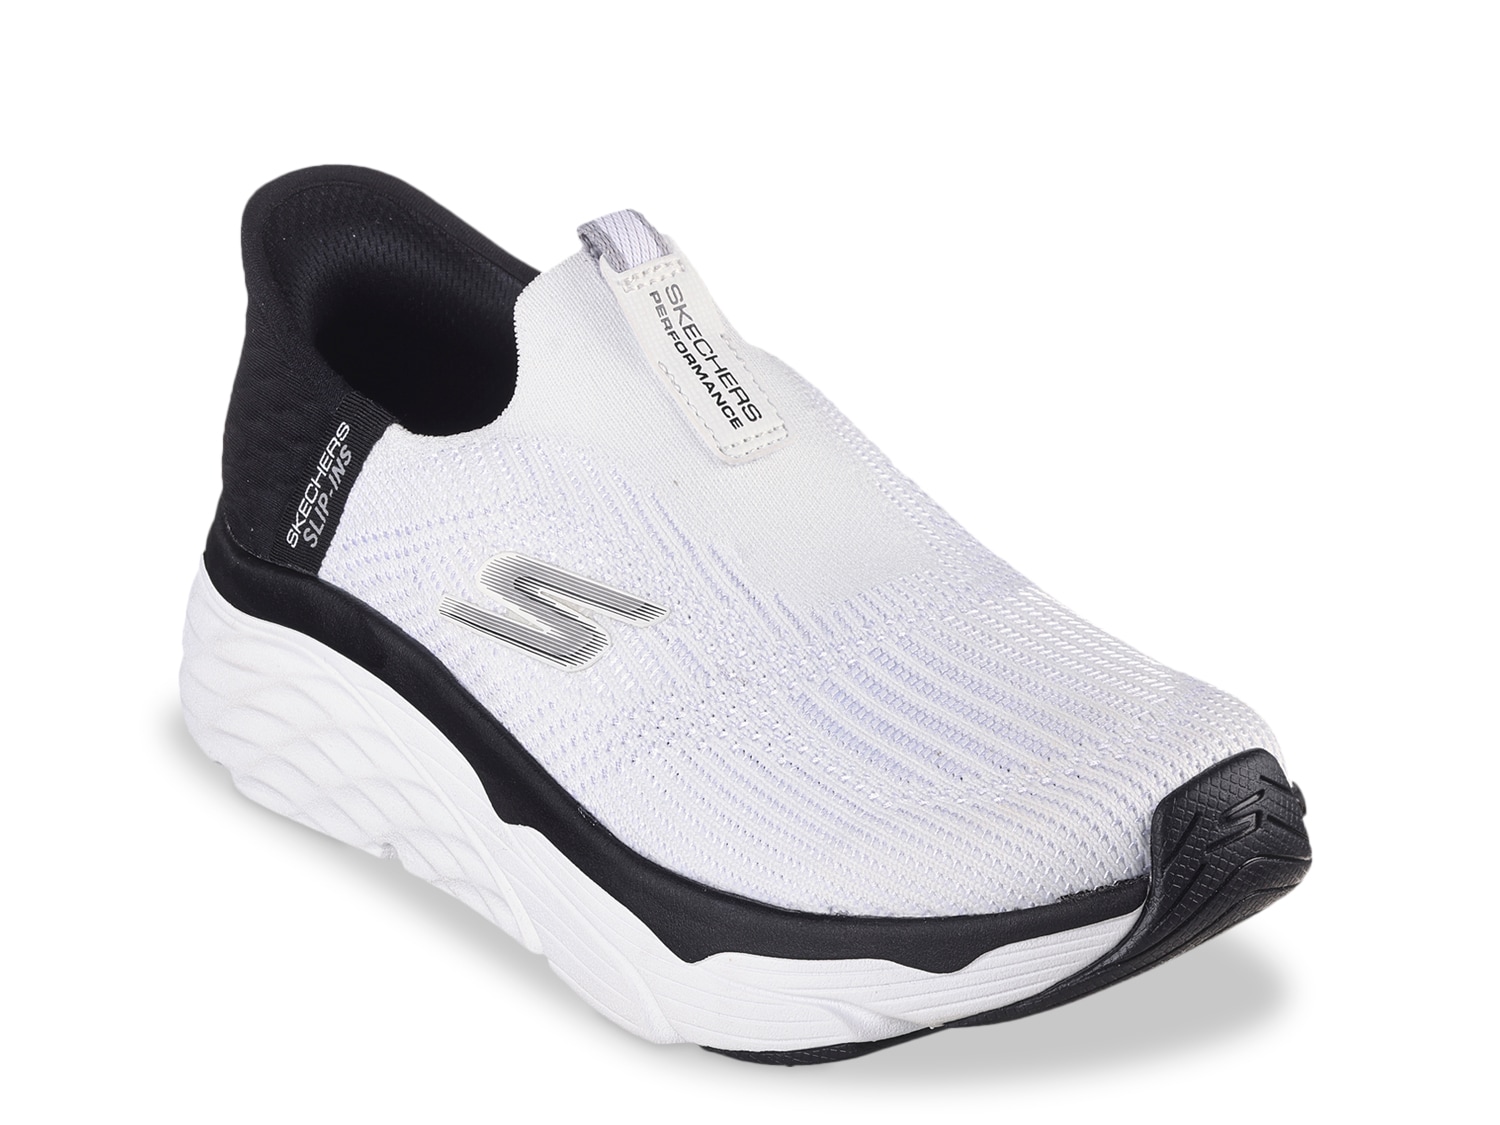 Skechers Slip-ins Ultra Flex Washable Knit Shoes - Smooth